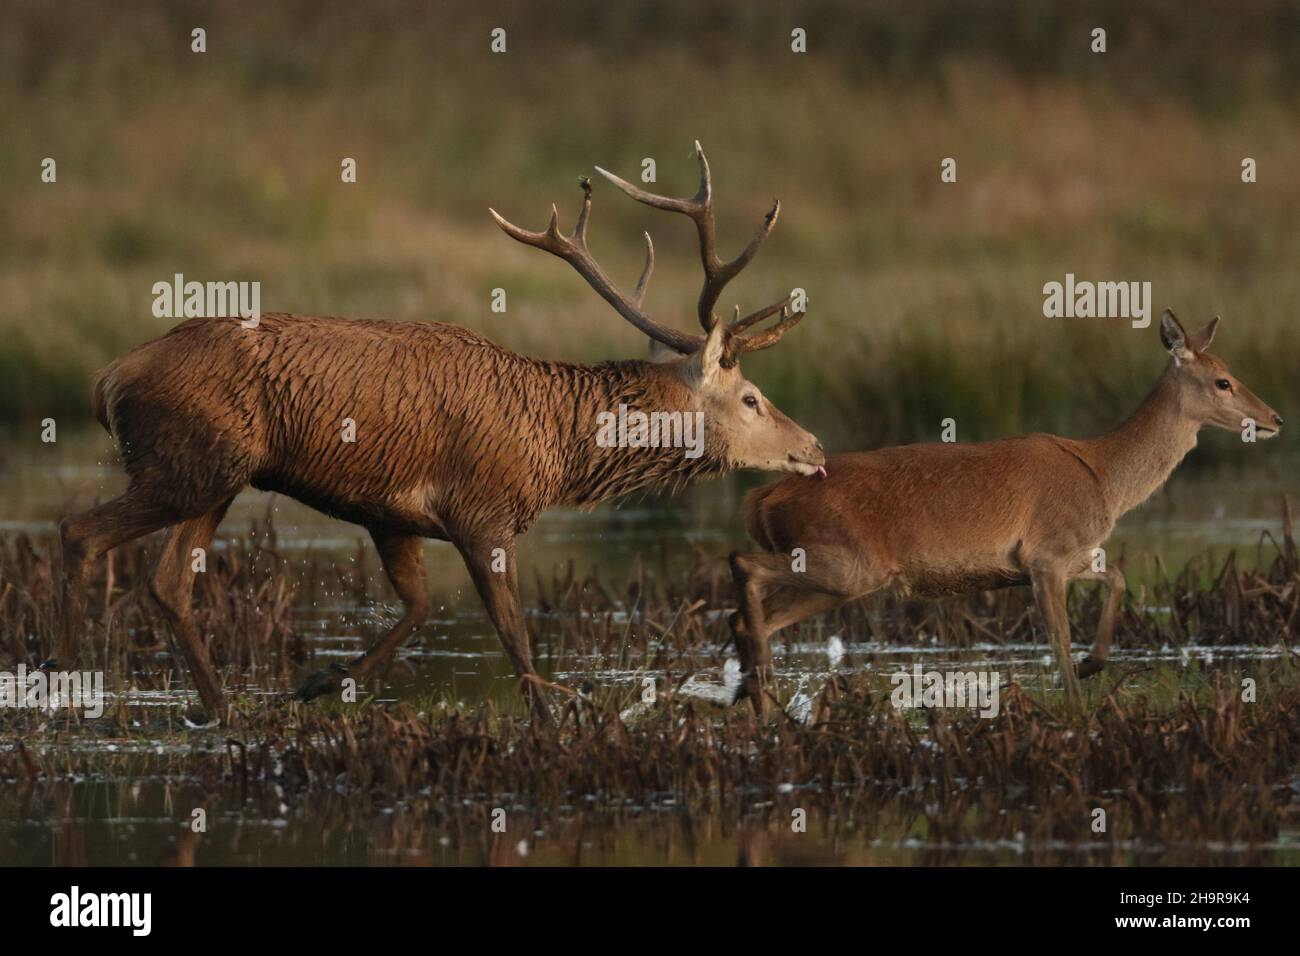 Red deer mate in the Autumn (the Rut) when the stags clash for dominance, the dominant animal having a harem of hinds which he mates with. Stock Photo